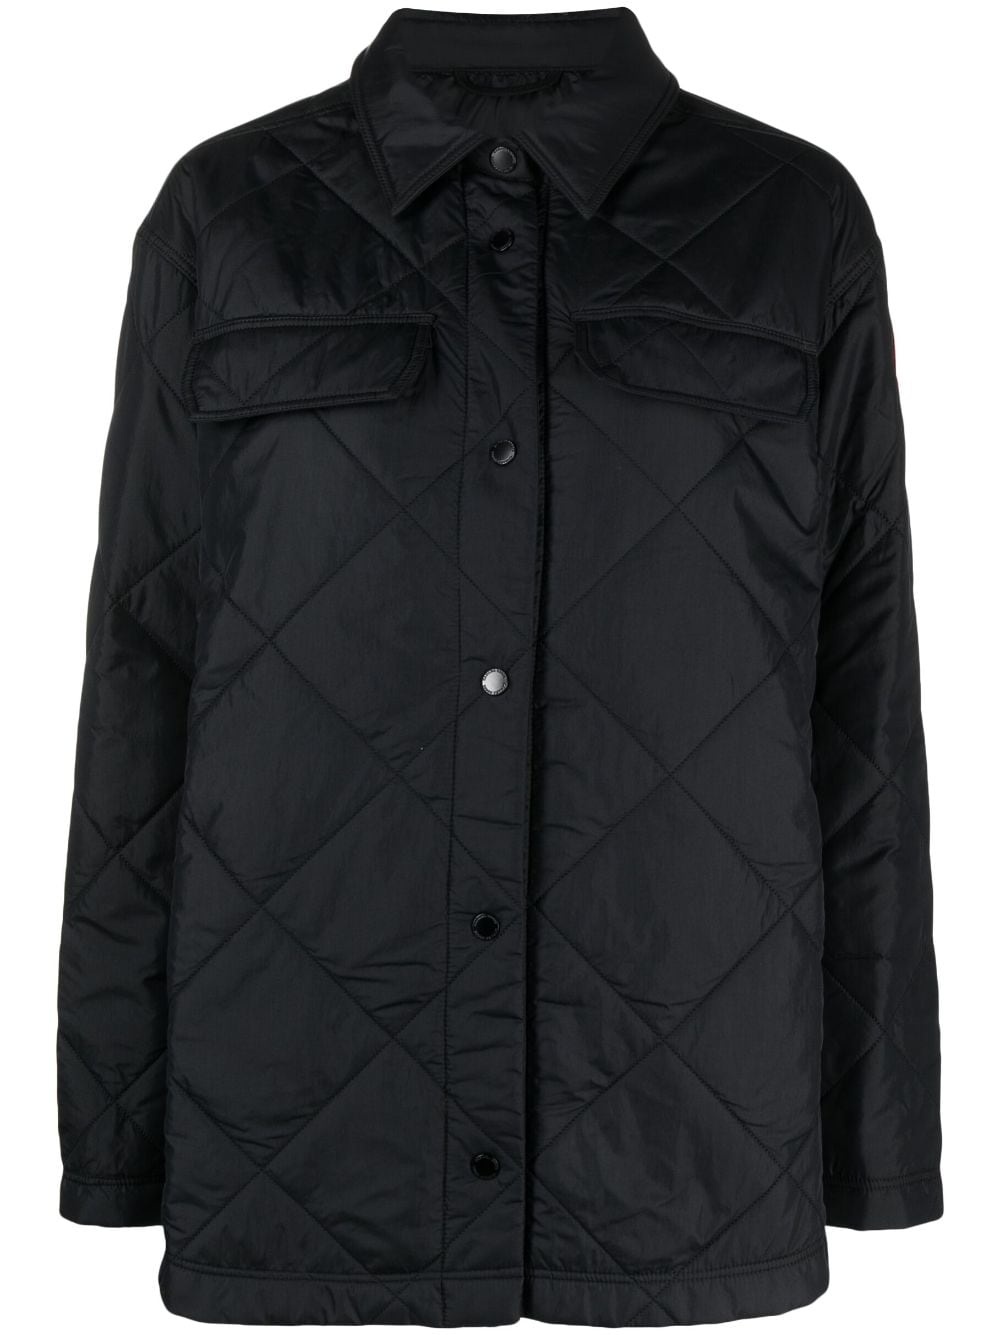 Albany quilted shirt jacket - 1